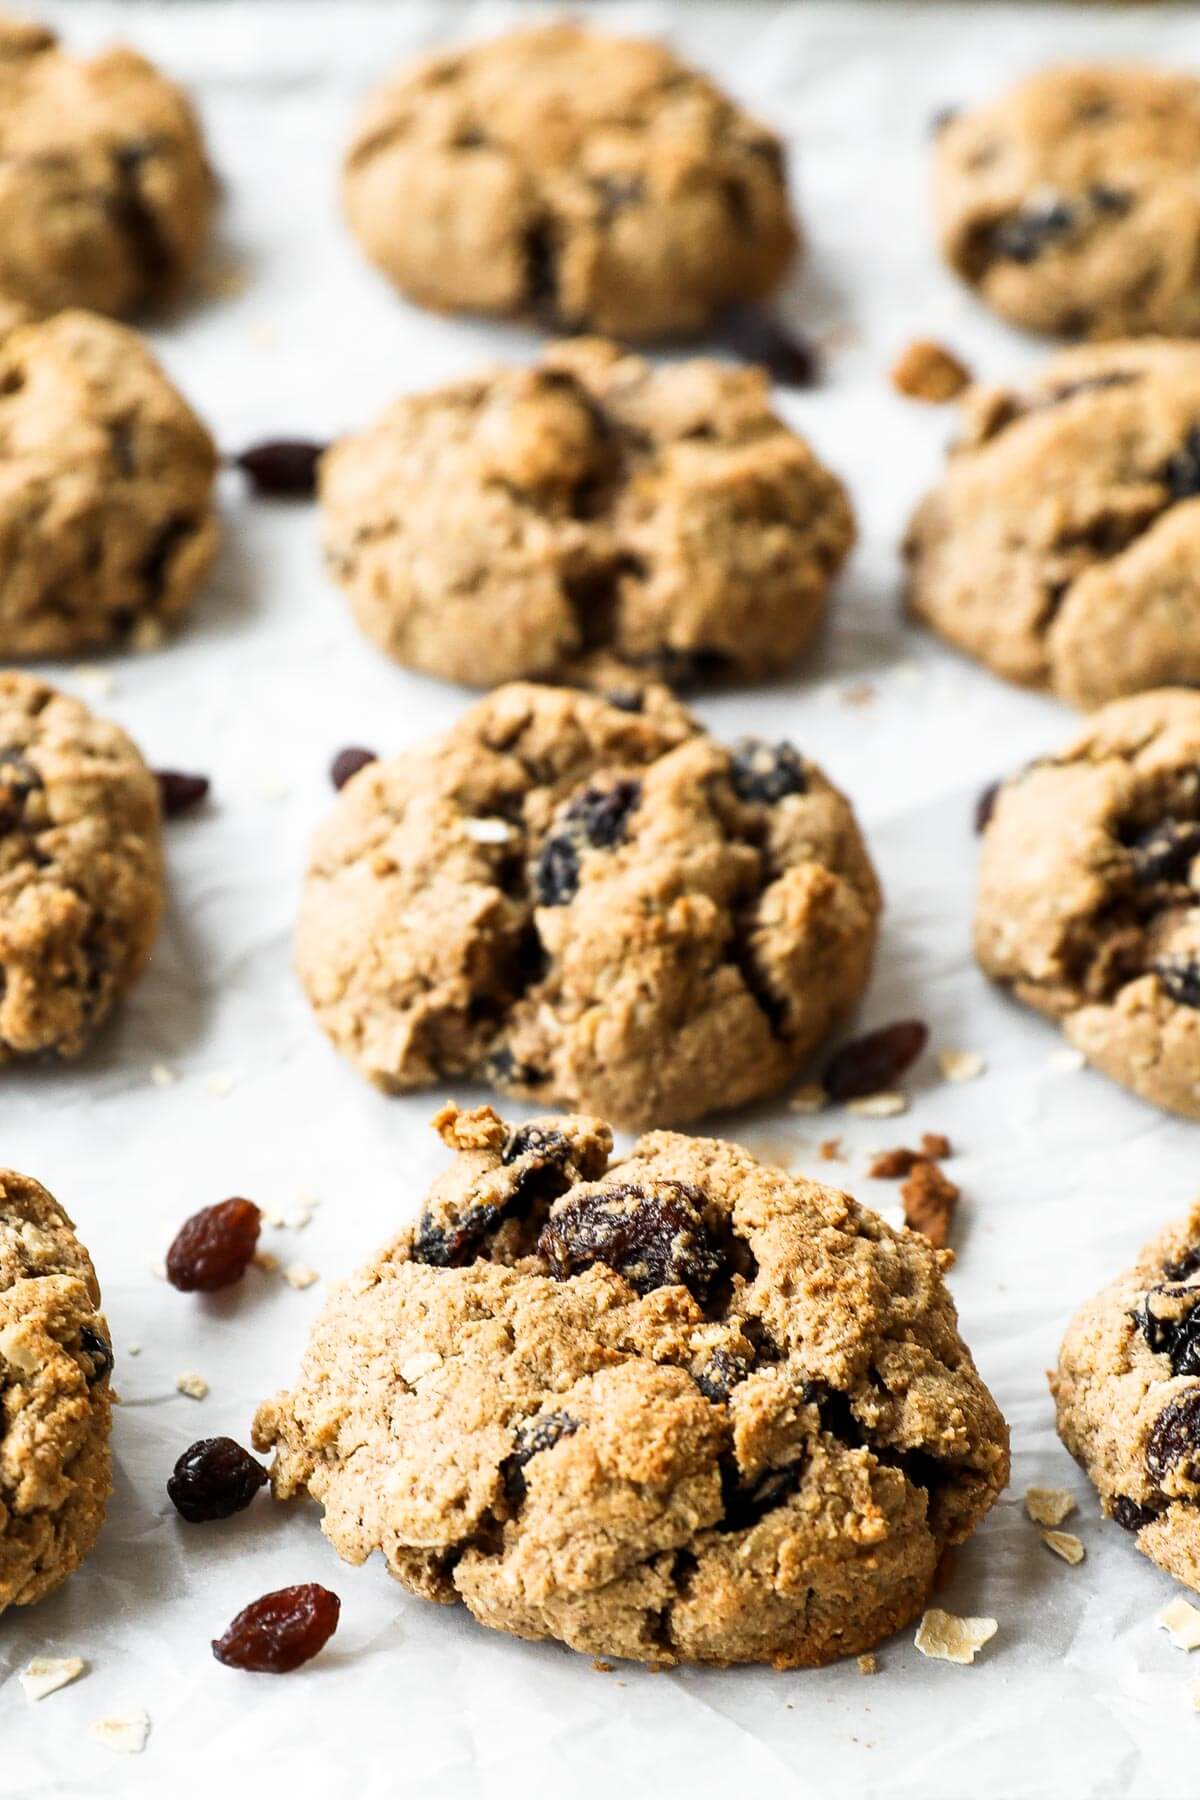 Angled image of vegan, healthy oatmeal raisin cookies on baking sheet. Front and center is a close up of one cookie with several others blurred out in the background.